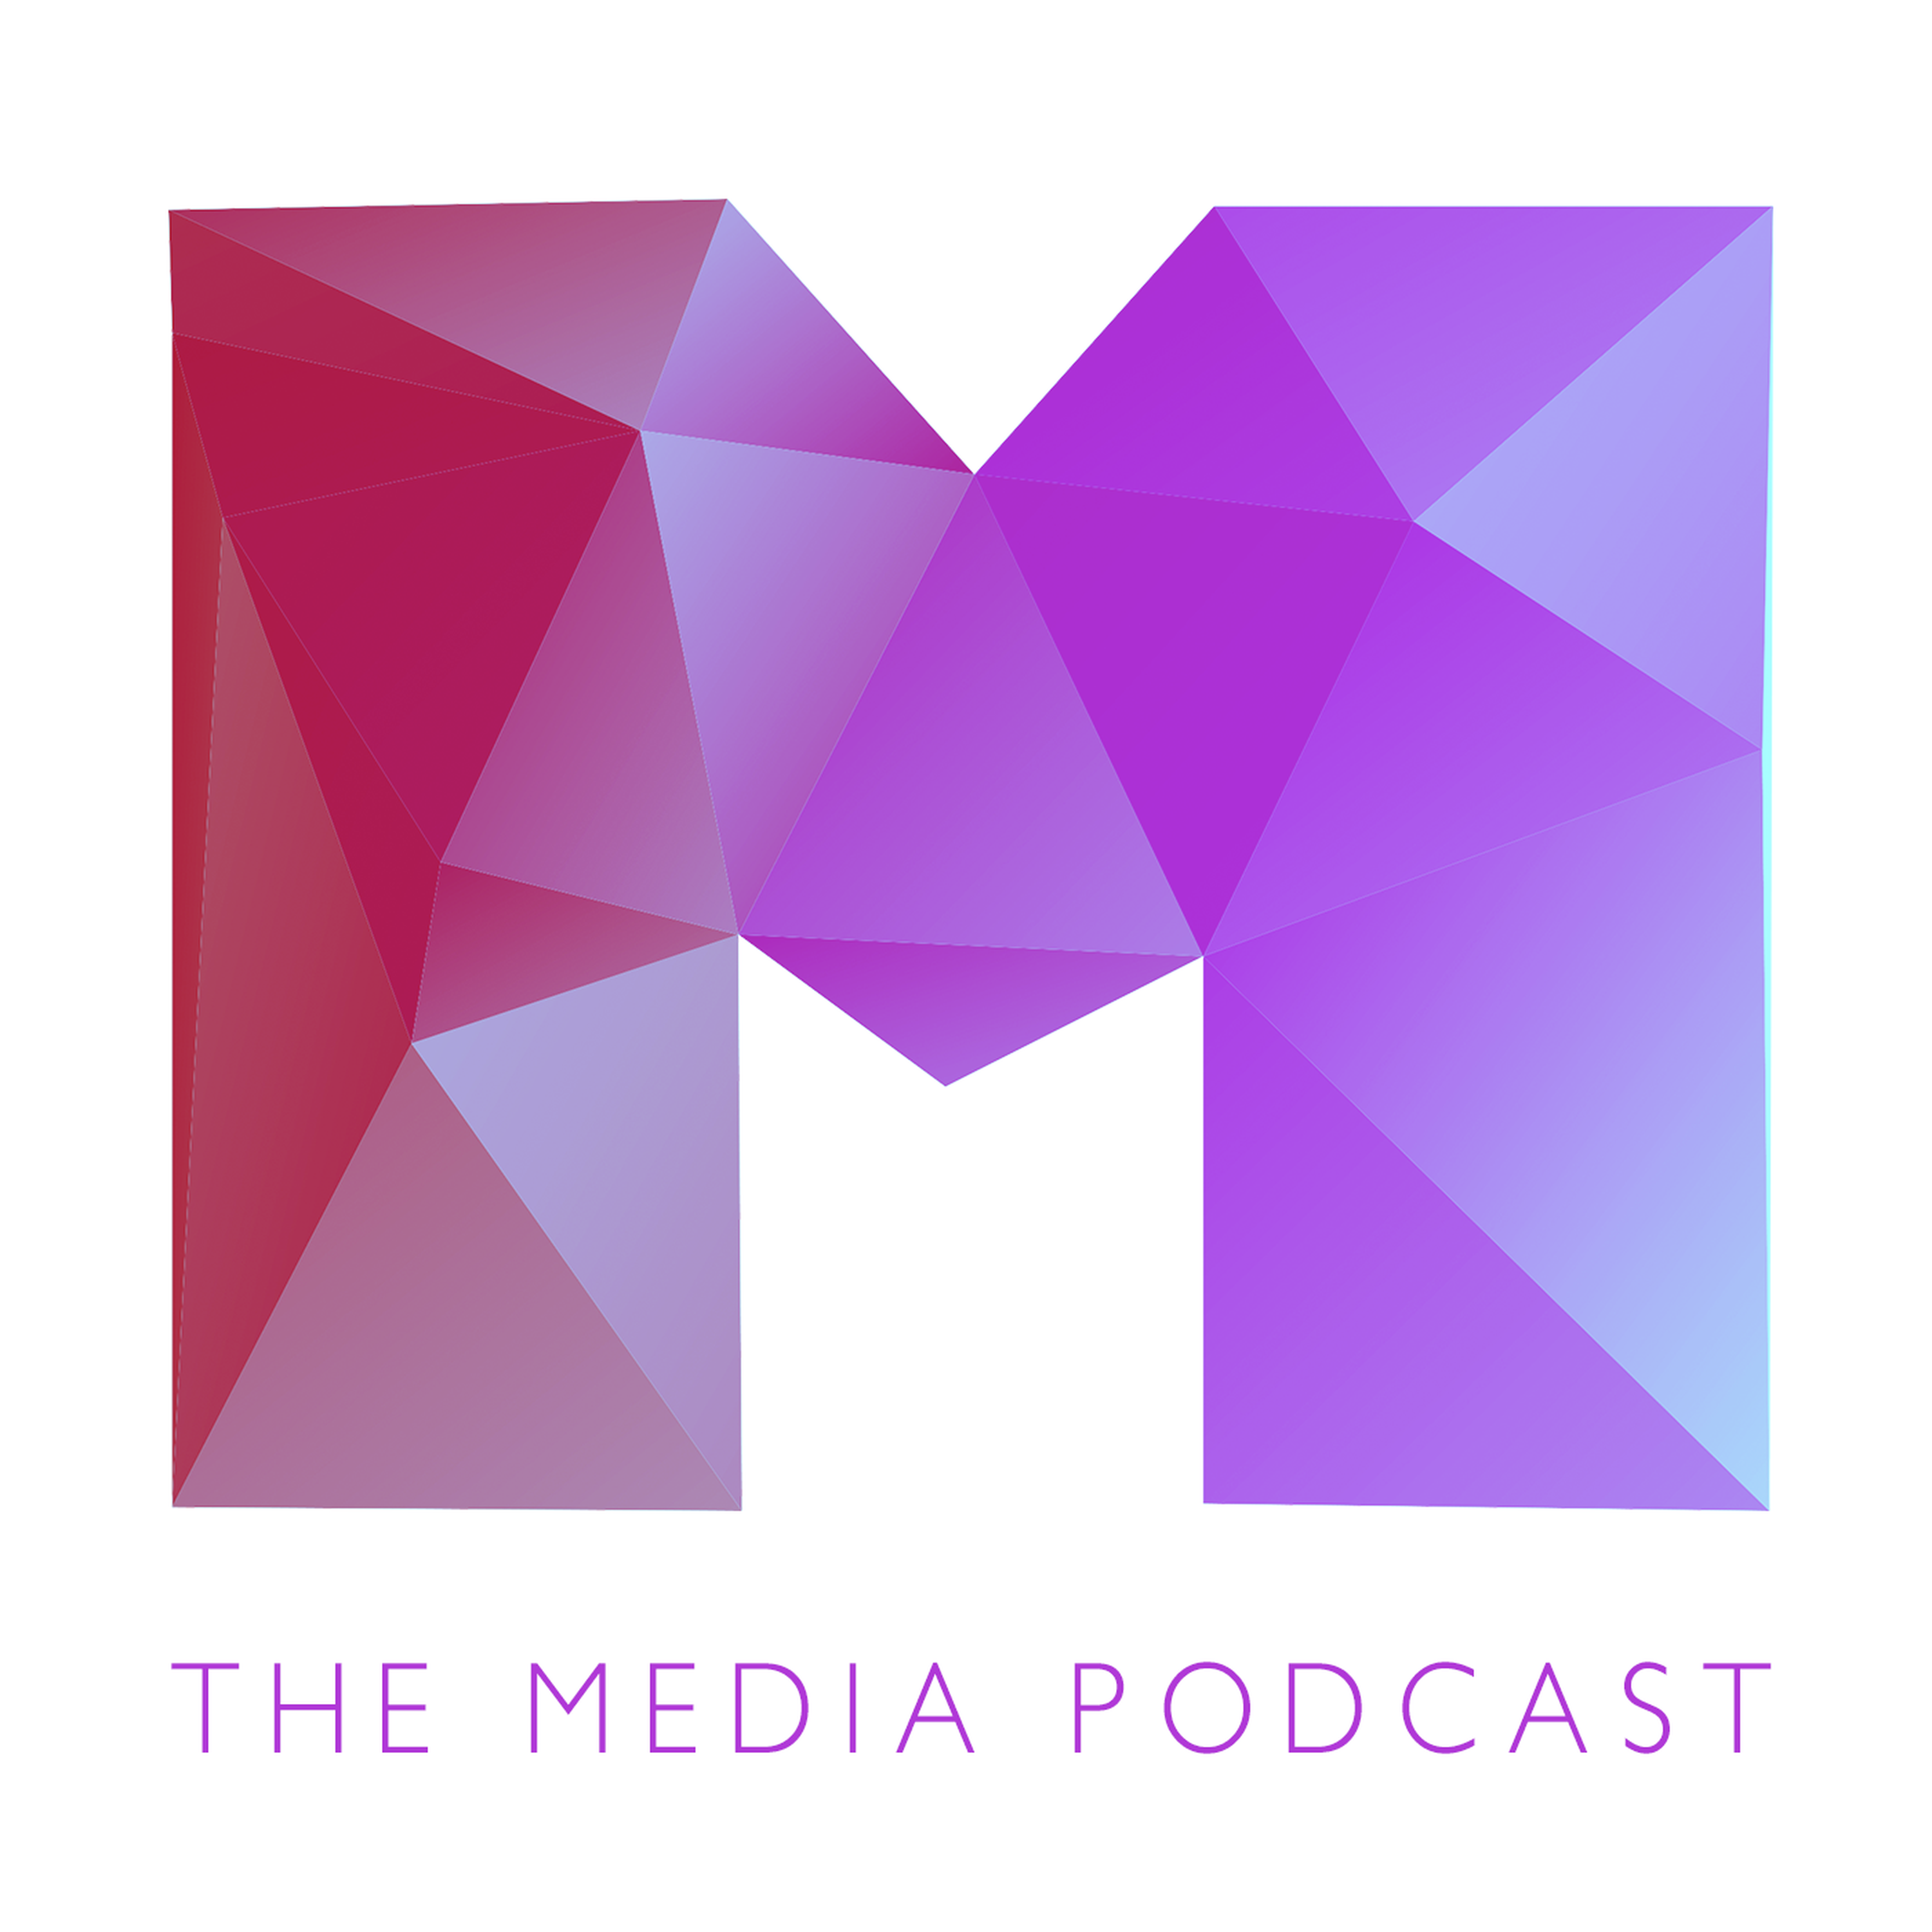 #80 - Murdoch Talks Tough In Cambridge, EU on TV and Newspapers - The Media Podcast with Olly Mann